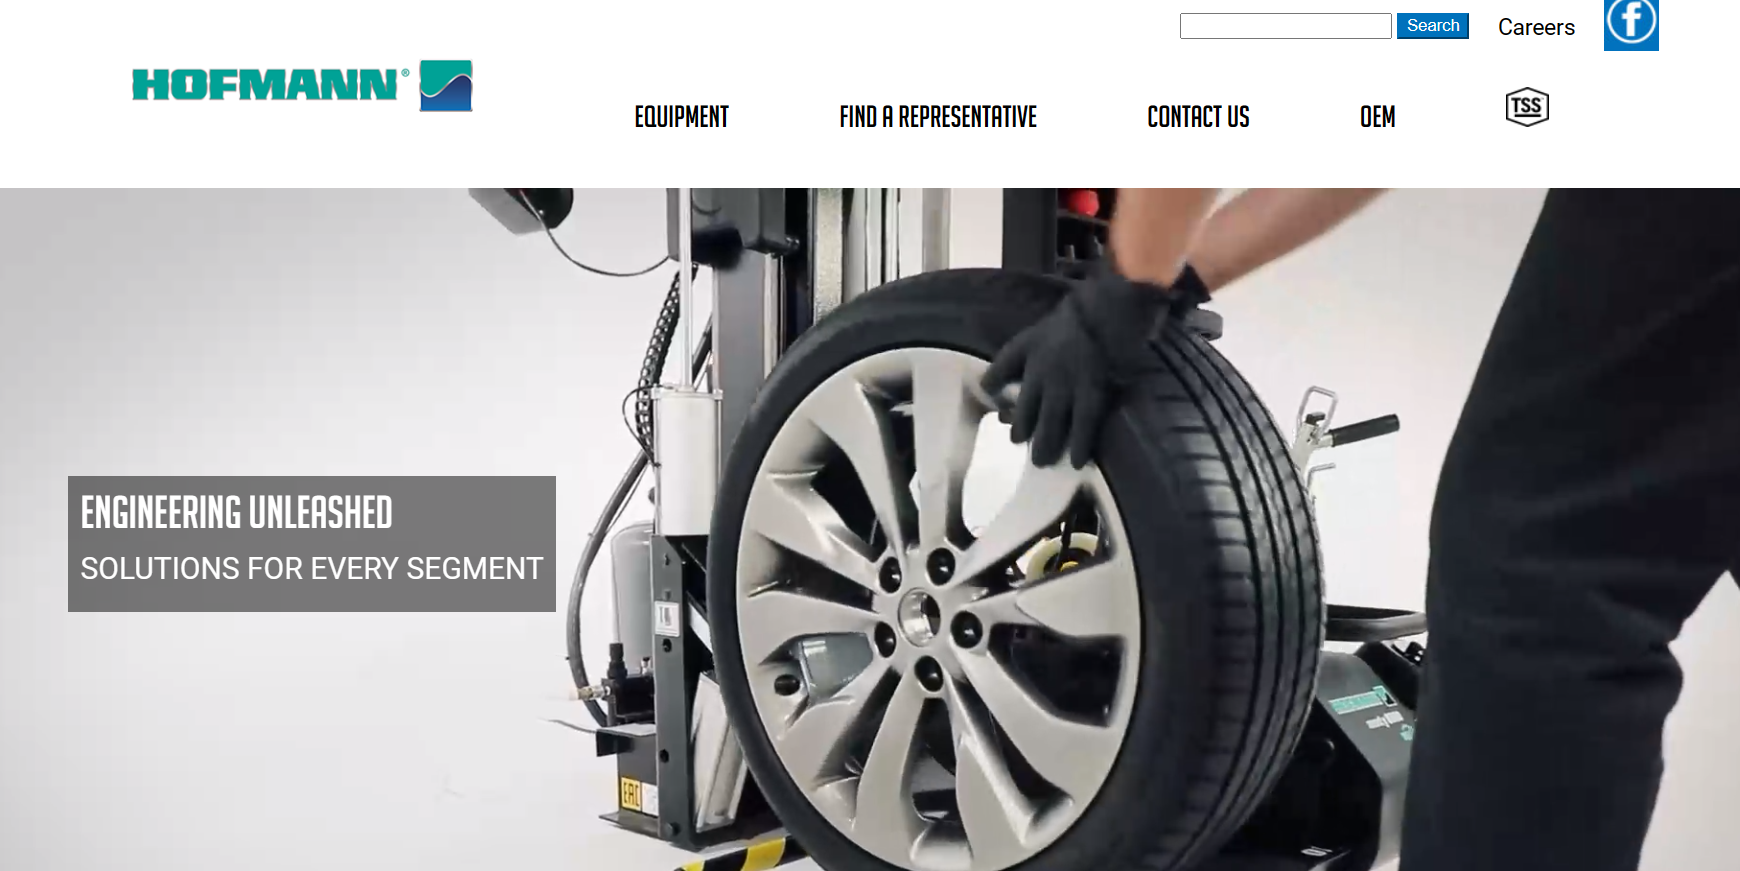 Hofmann has redesigned its website to provide easier access to comprehensive information about its award-winning products and to help customers make well-informed decisions about the Hofmann wheel service products that are best for their respective shop locations.